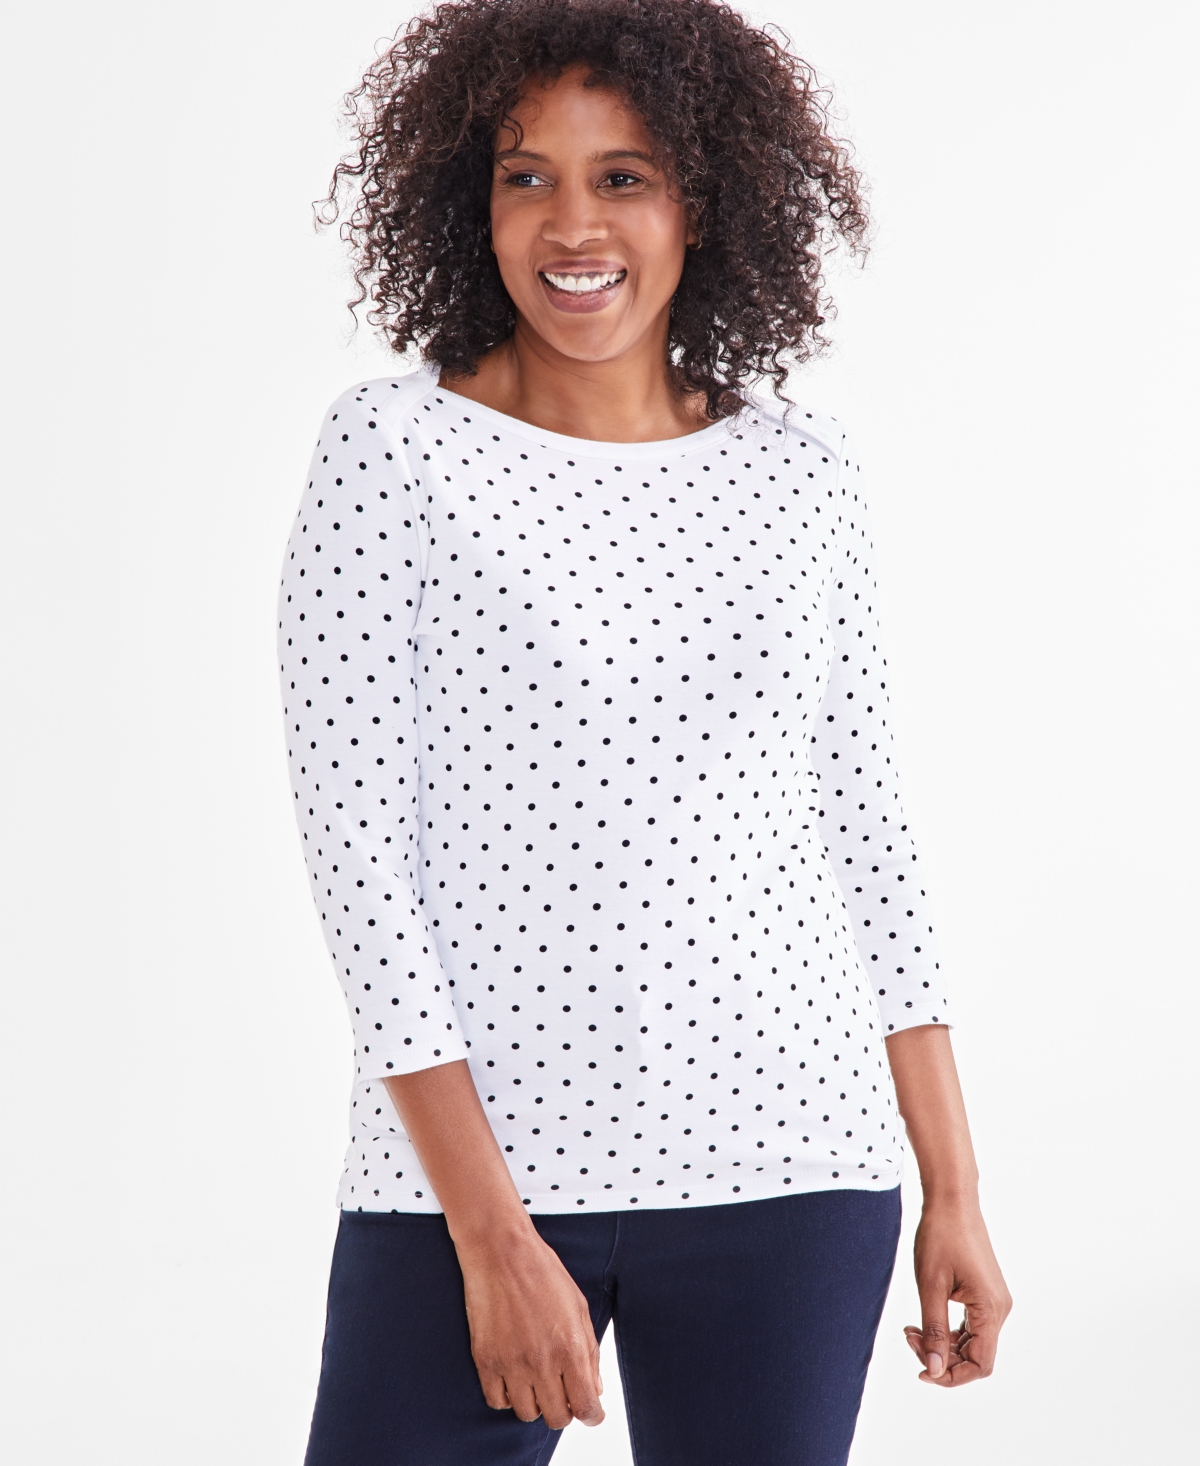 Women's Printed Pima Cotton 3/4-Sleeve Top, Created for Macy's - Dot White Black